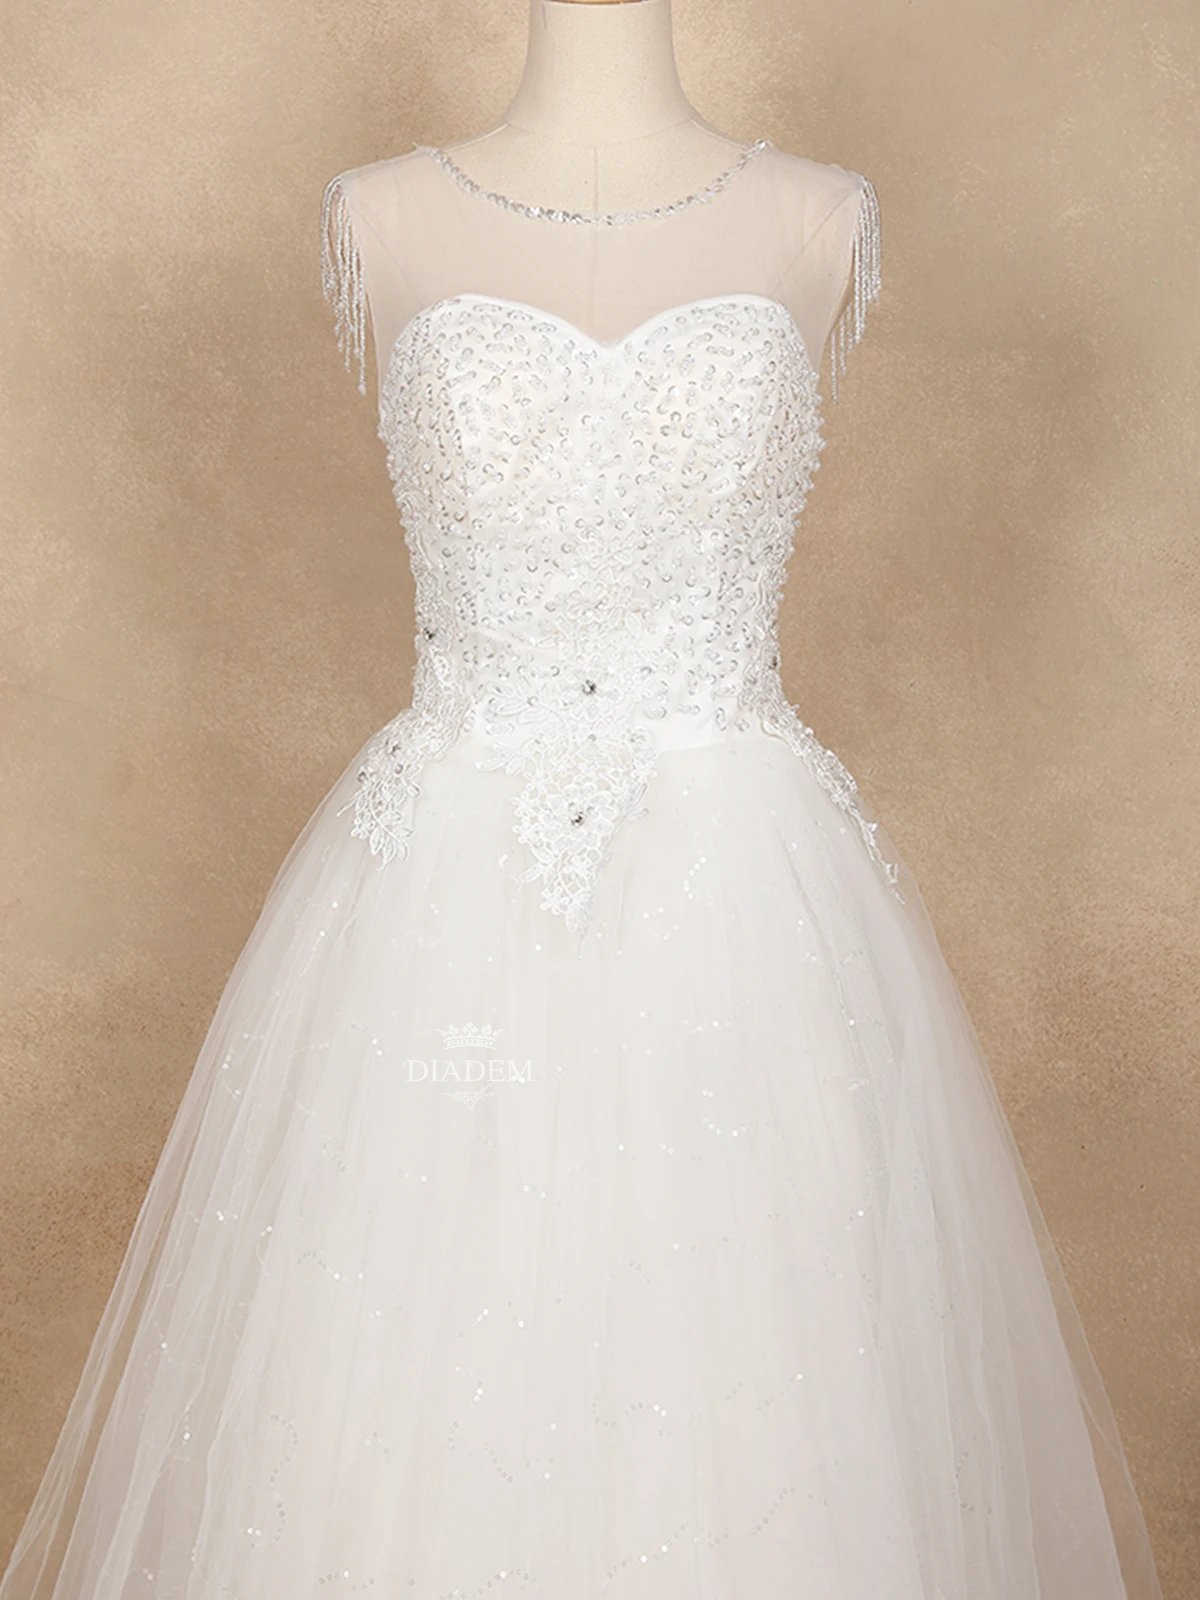 White Wedding Net Gown Adorned With Sequins And Bead Work With Beaded Tassels On Sleeve